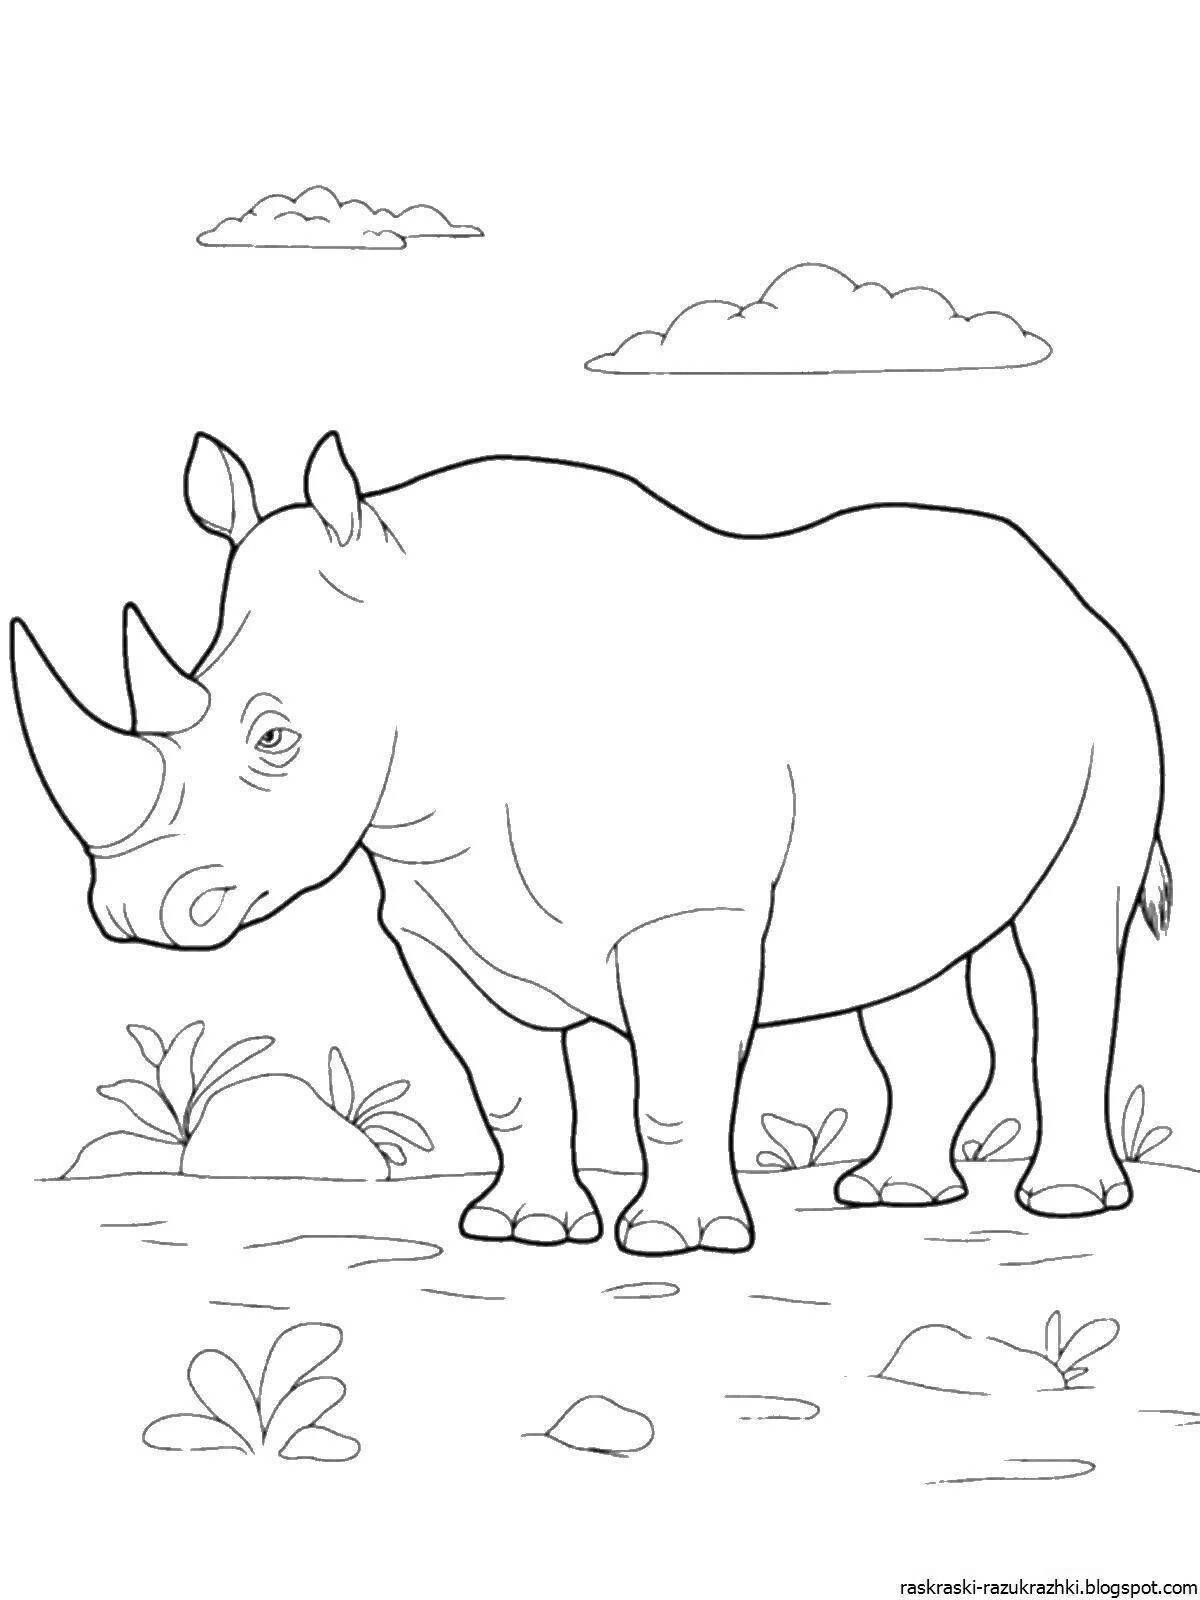 Intriguing coloring pages animals of hot countries for children 6-7 years old